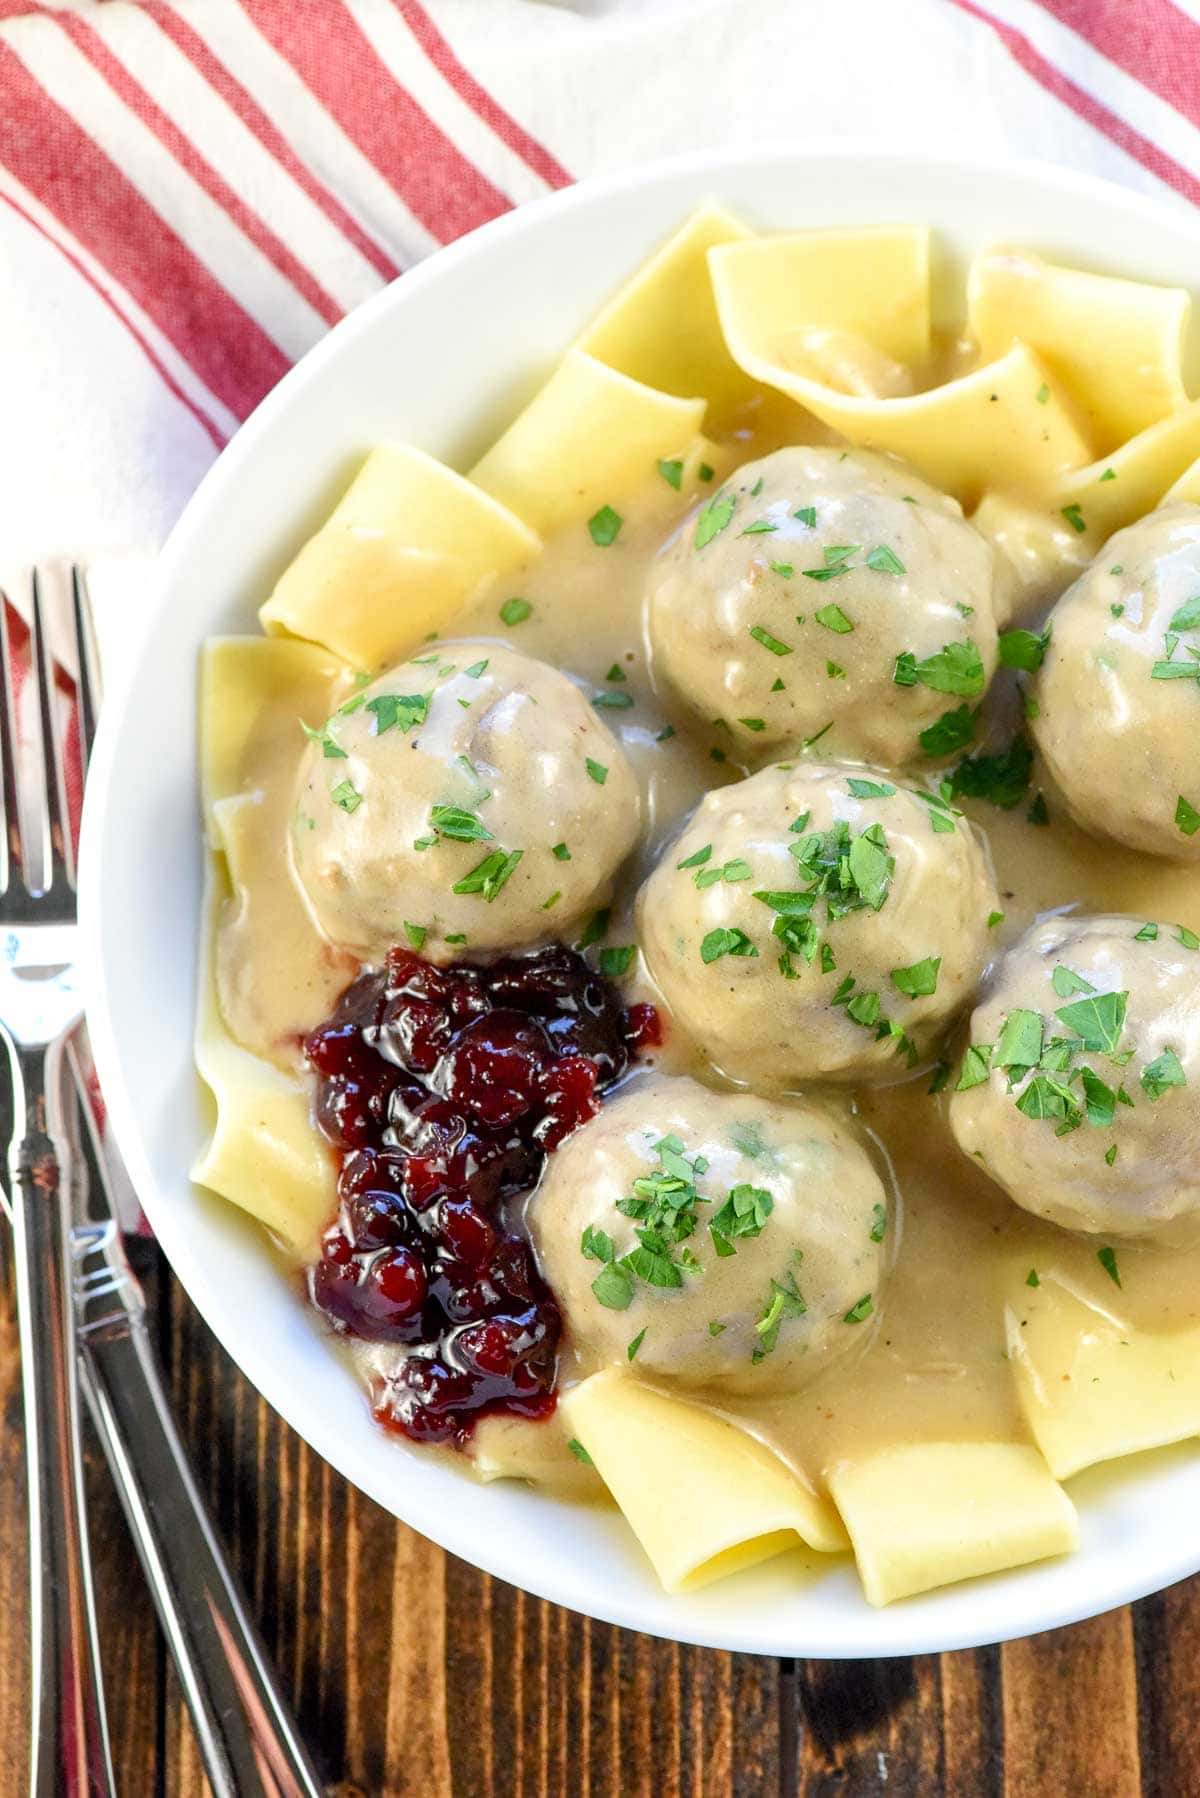 Aerial view of Swedish Meatballs with parsley and lingonberry jam.